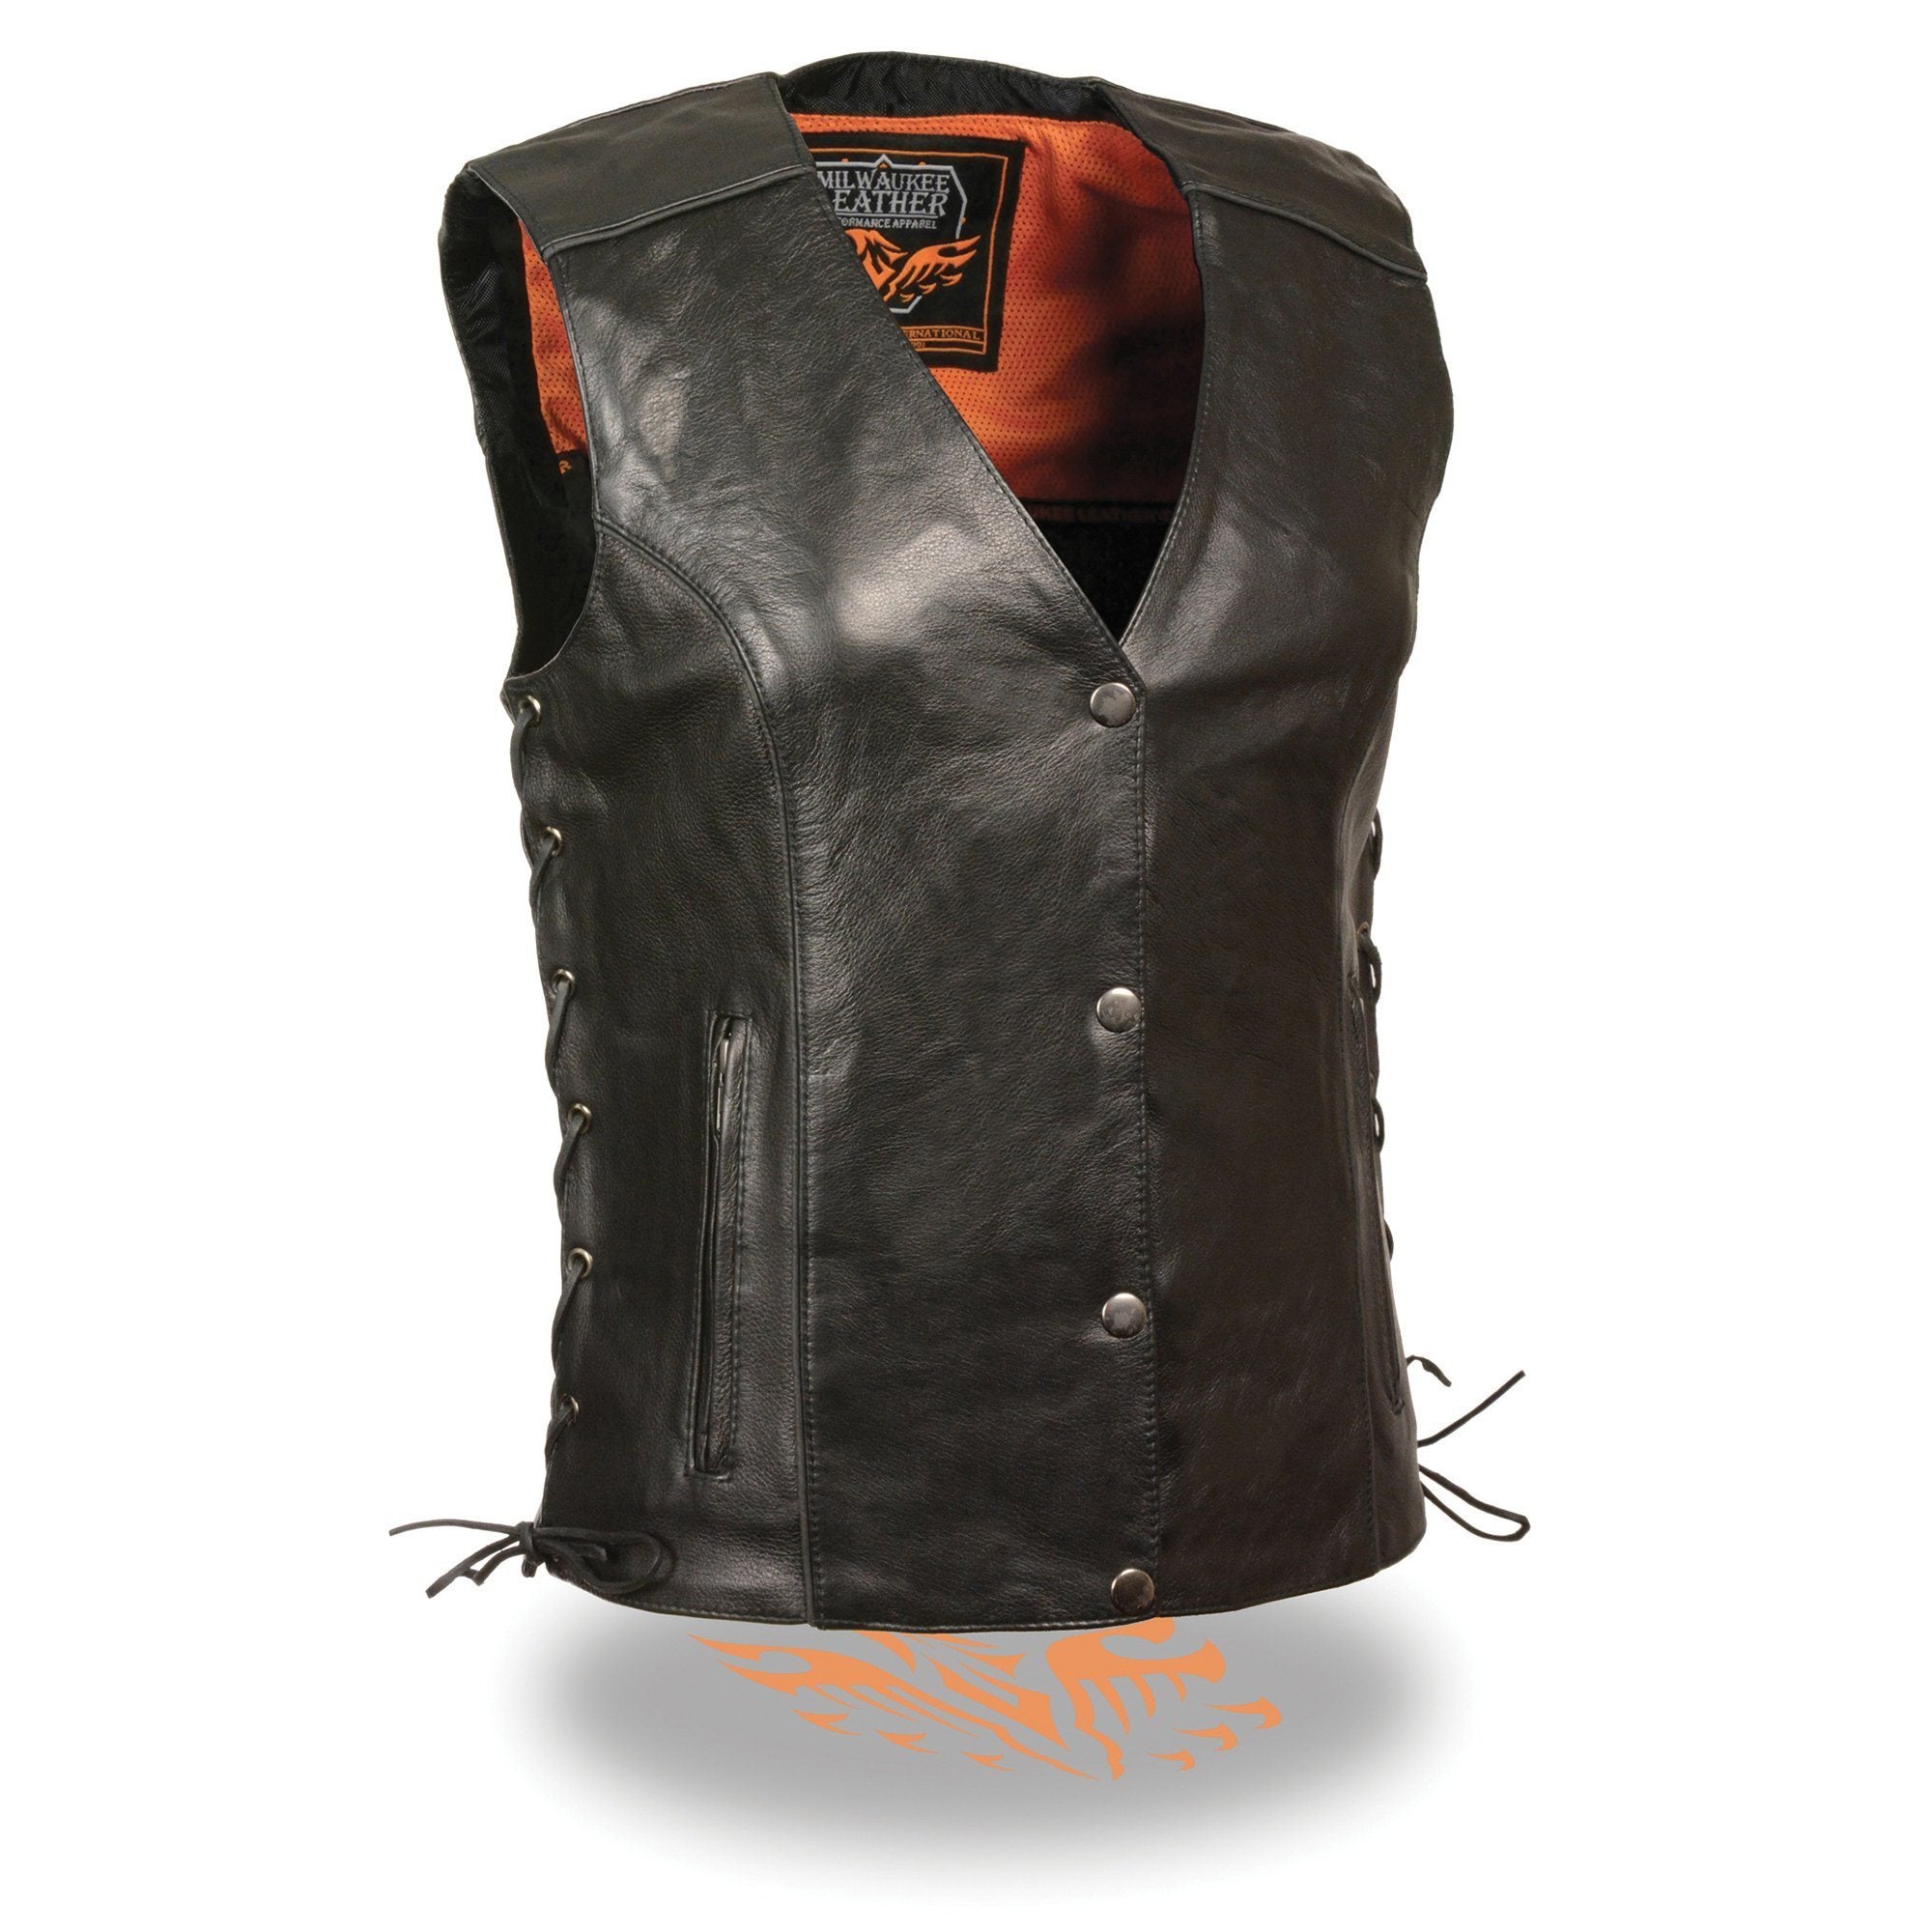 Milwaukee Leather MLL4505 Ladies Black Leather Vest with Stud and Wings Detailing - Milwaukee Leather Womens Leather Vests